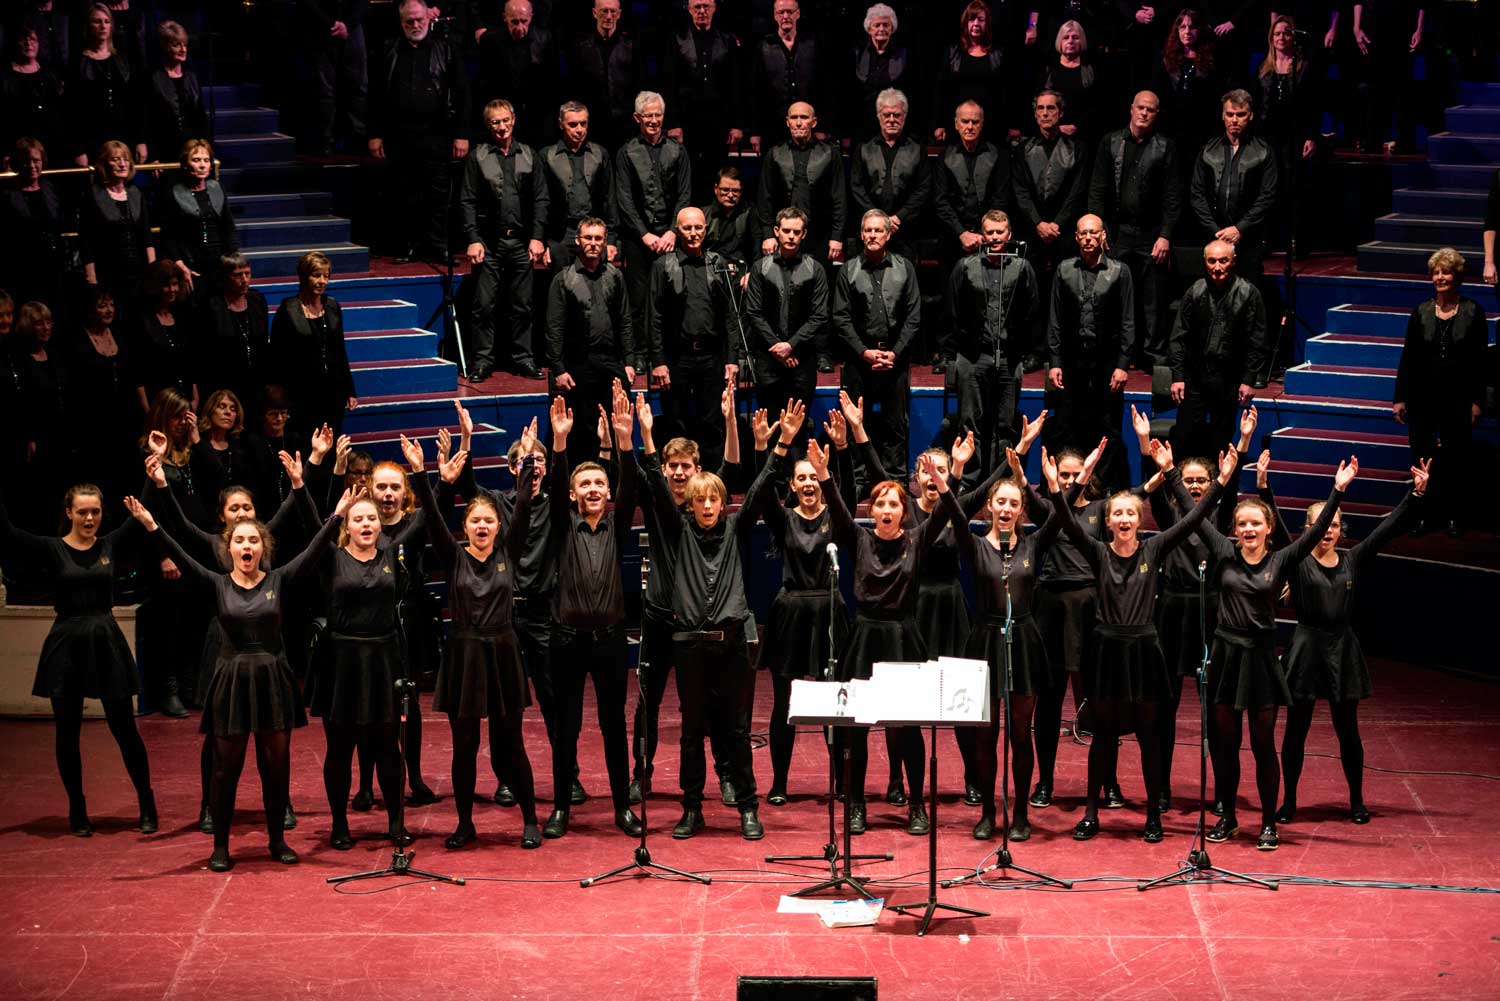 Rock Up and Sing! Youth Choir, which has been wowing audiences in Yorkshire for the last few years, will head to Birmingham for a performance at the Symphony Hall as part of the Music for Youth National Festival in July